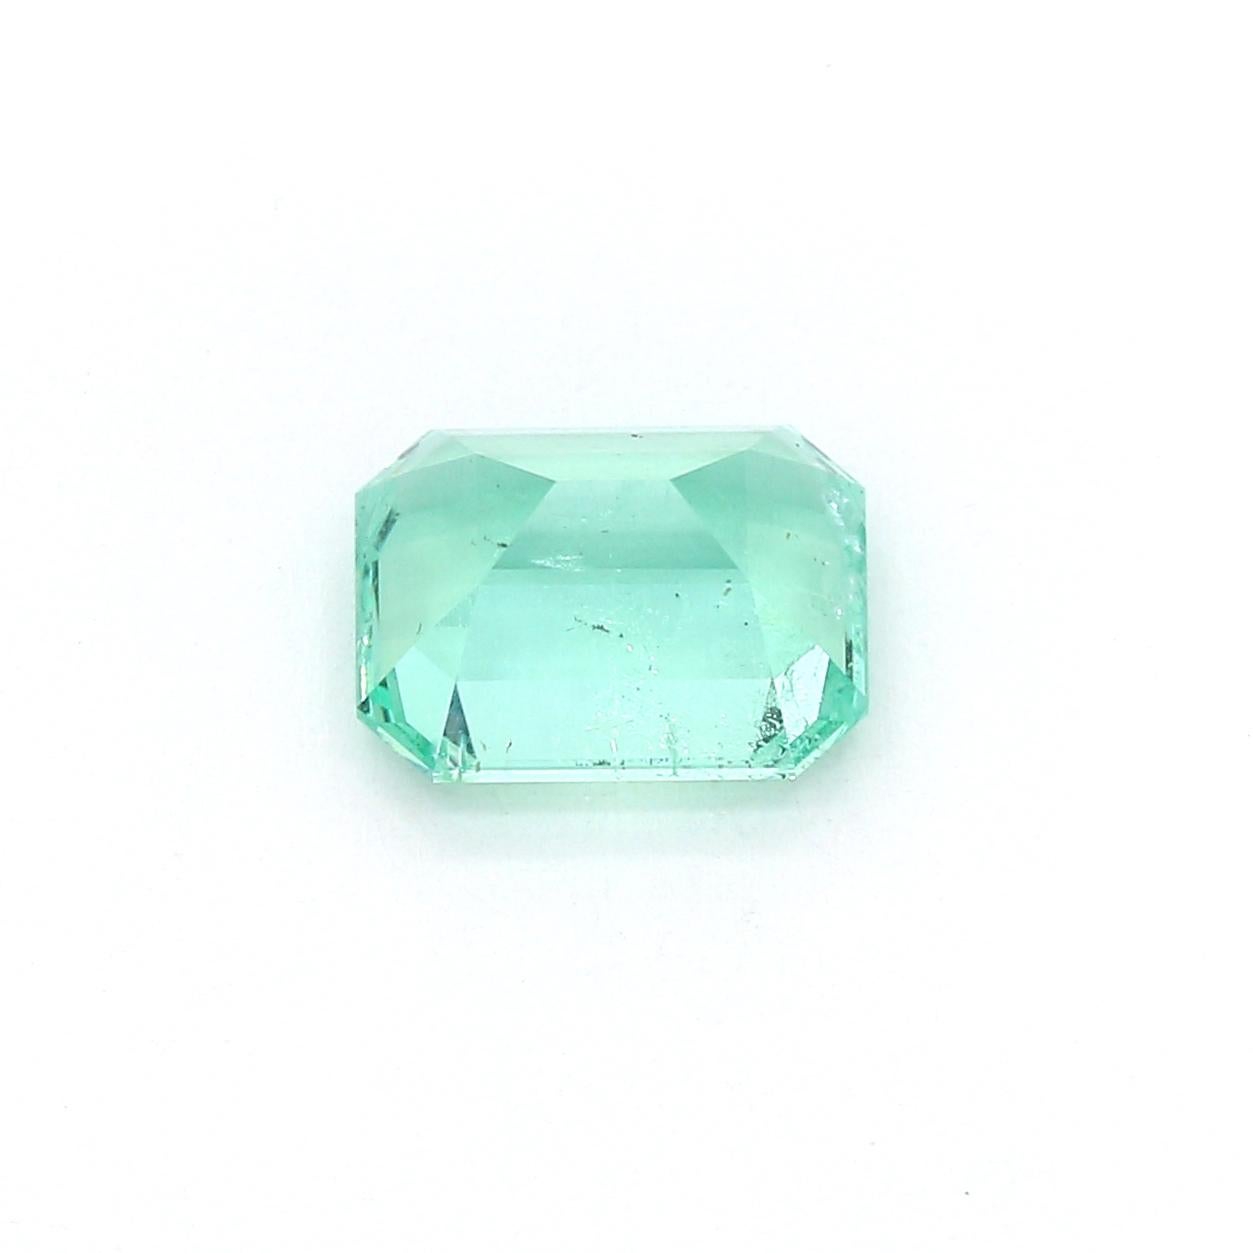 Emeralds from Russia are described as having a neon green color and superb brilliance. The stones are highly refractive, which makes them look vivid even at small sizes. Russian emeralds exhibit excellent clarity, particularly when compared to other